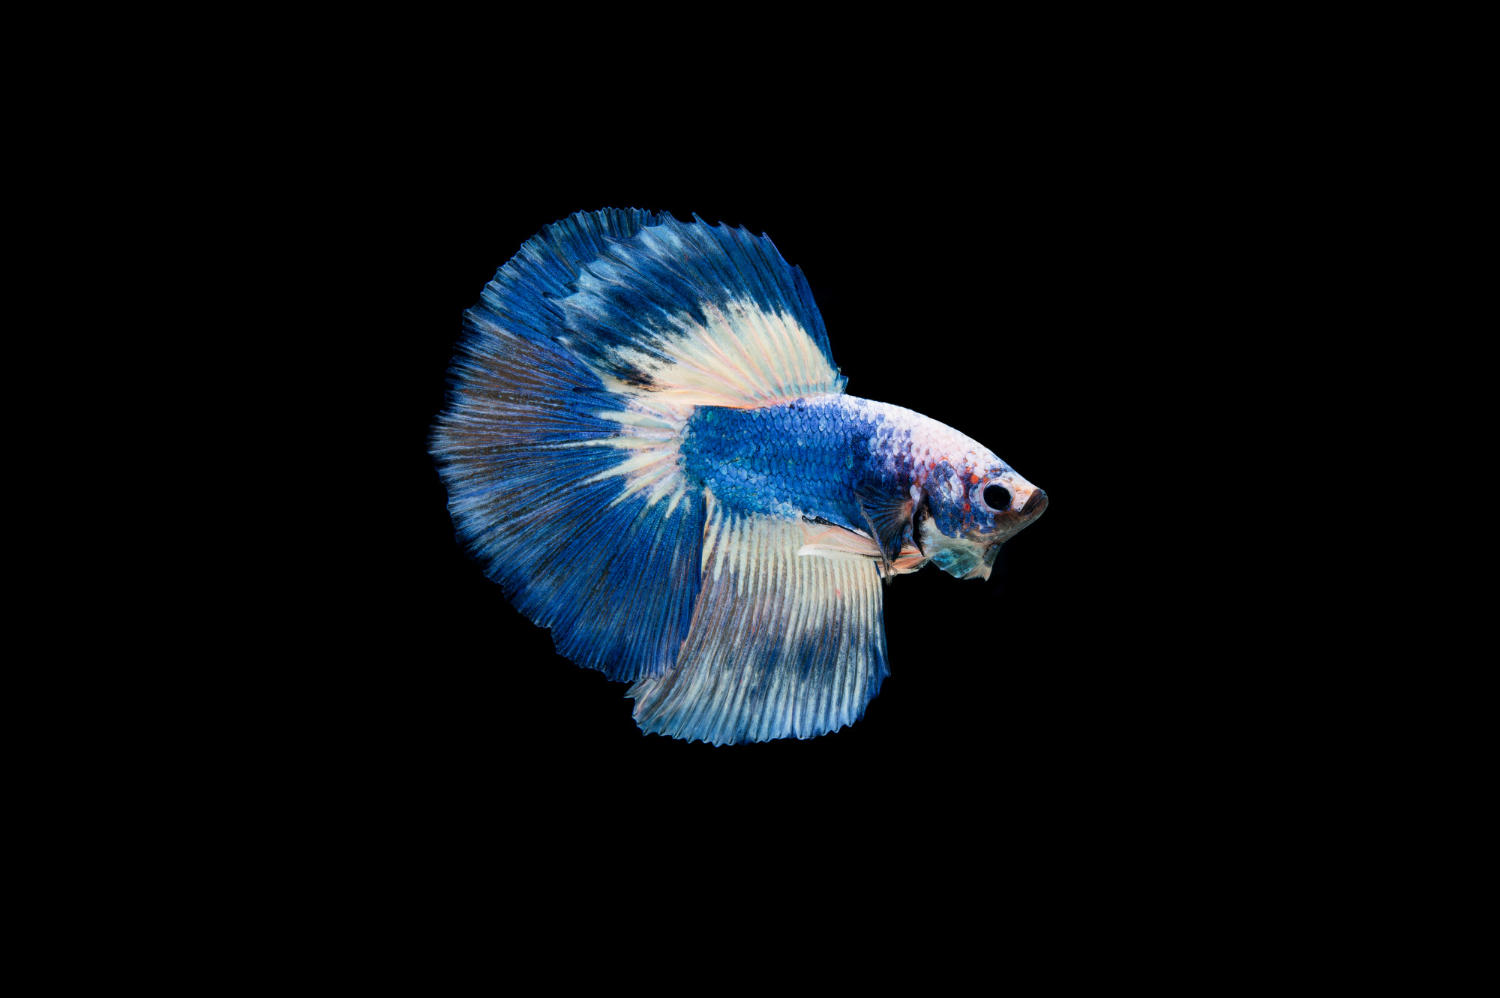 Finding the Perfect Filter for Your Betta Fish - What to Look For